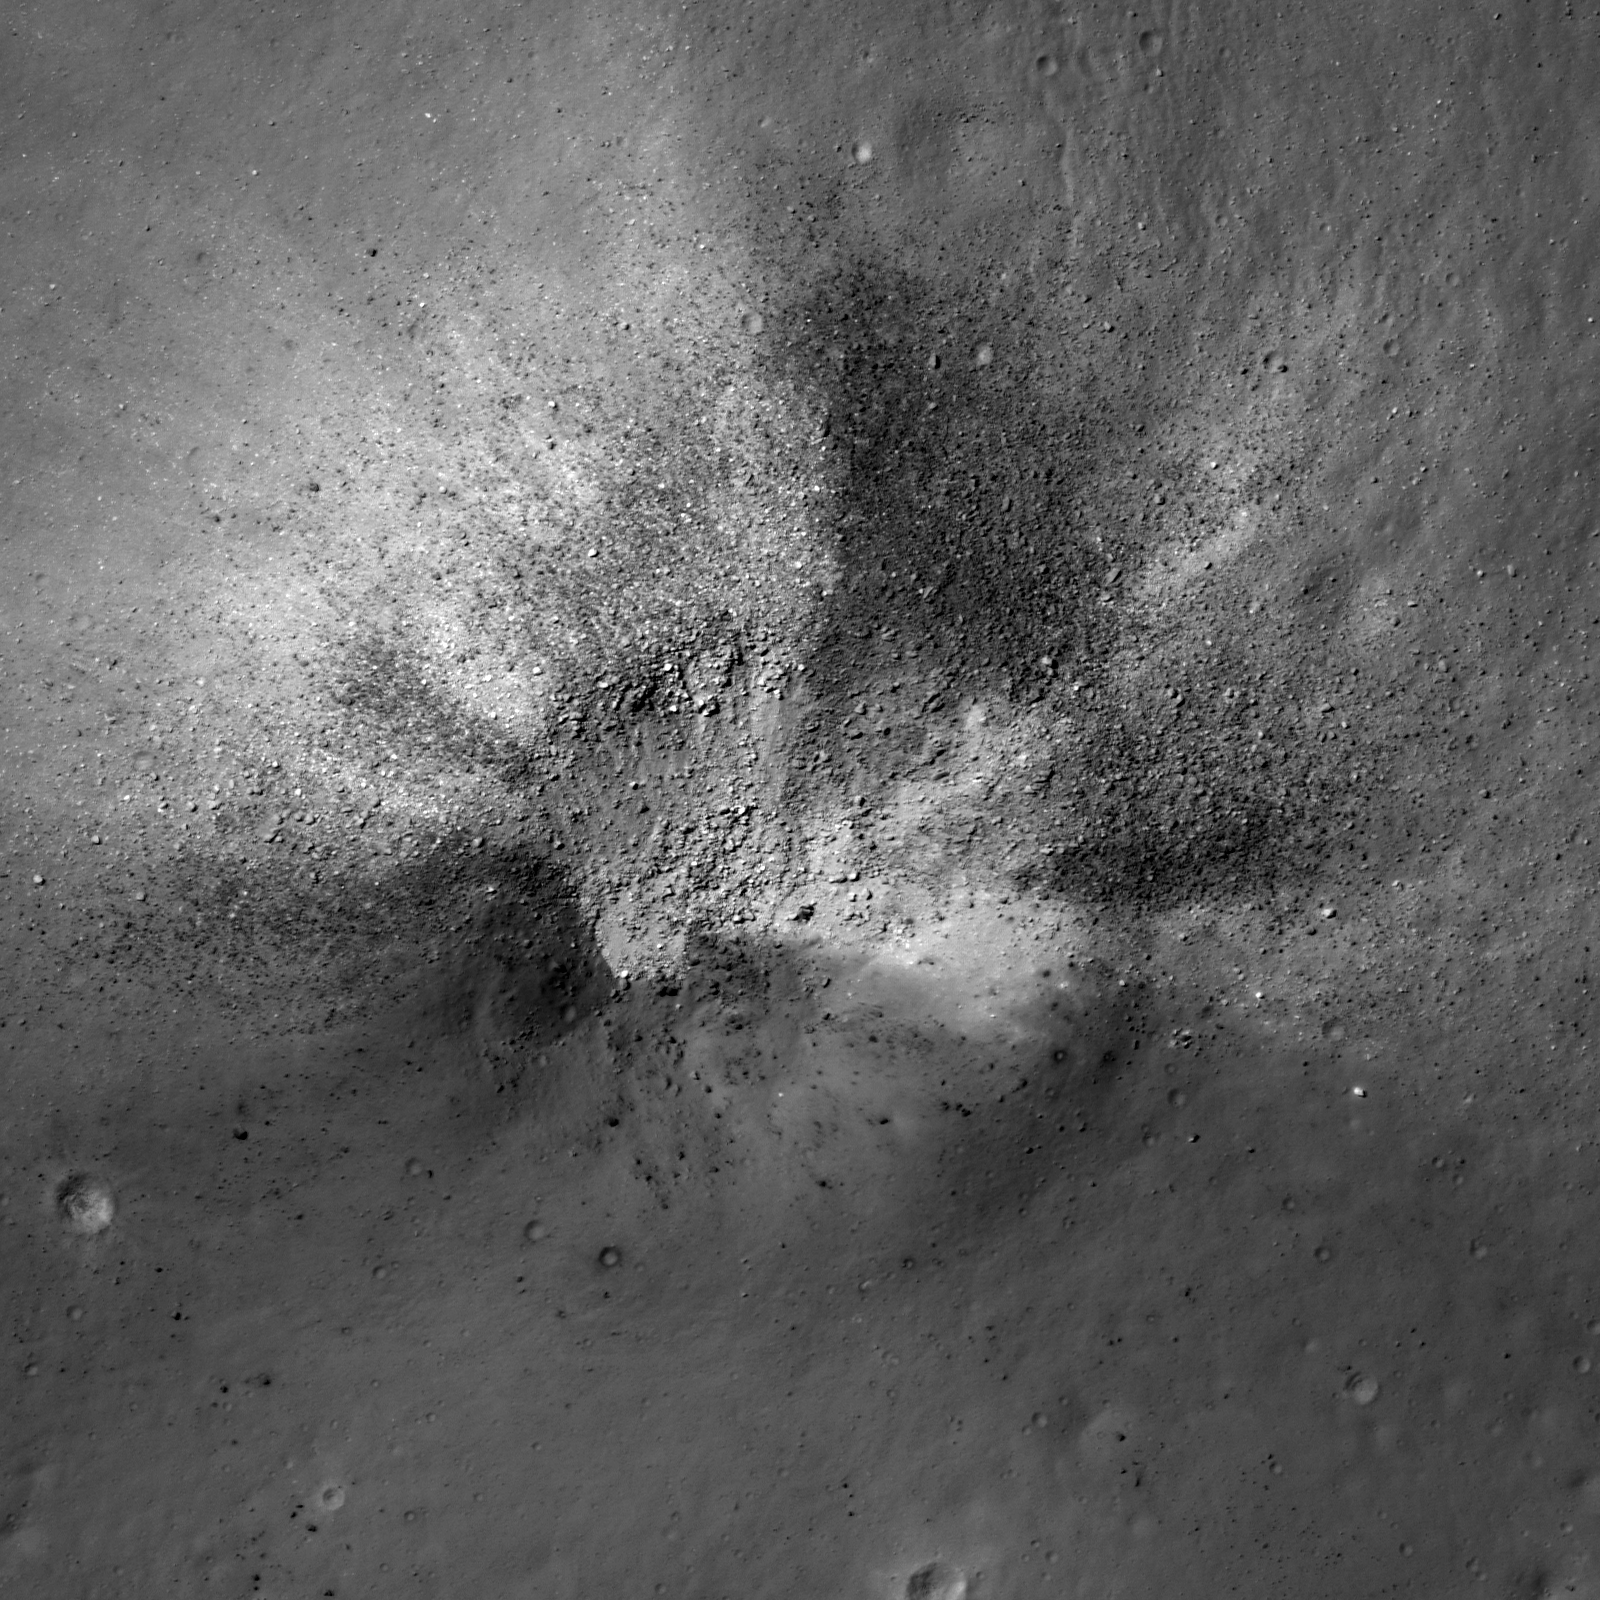 Not Your Average Crater